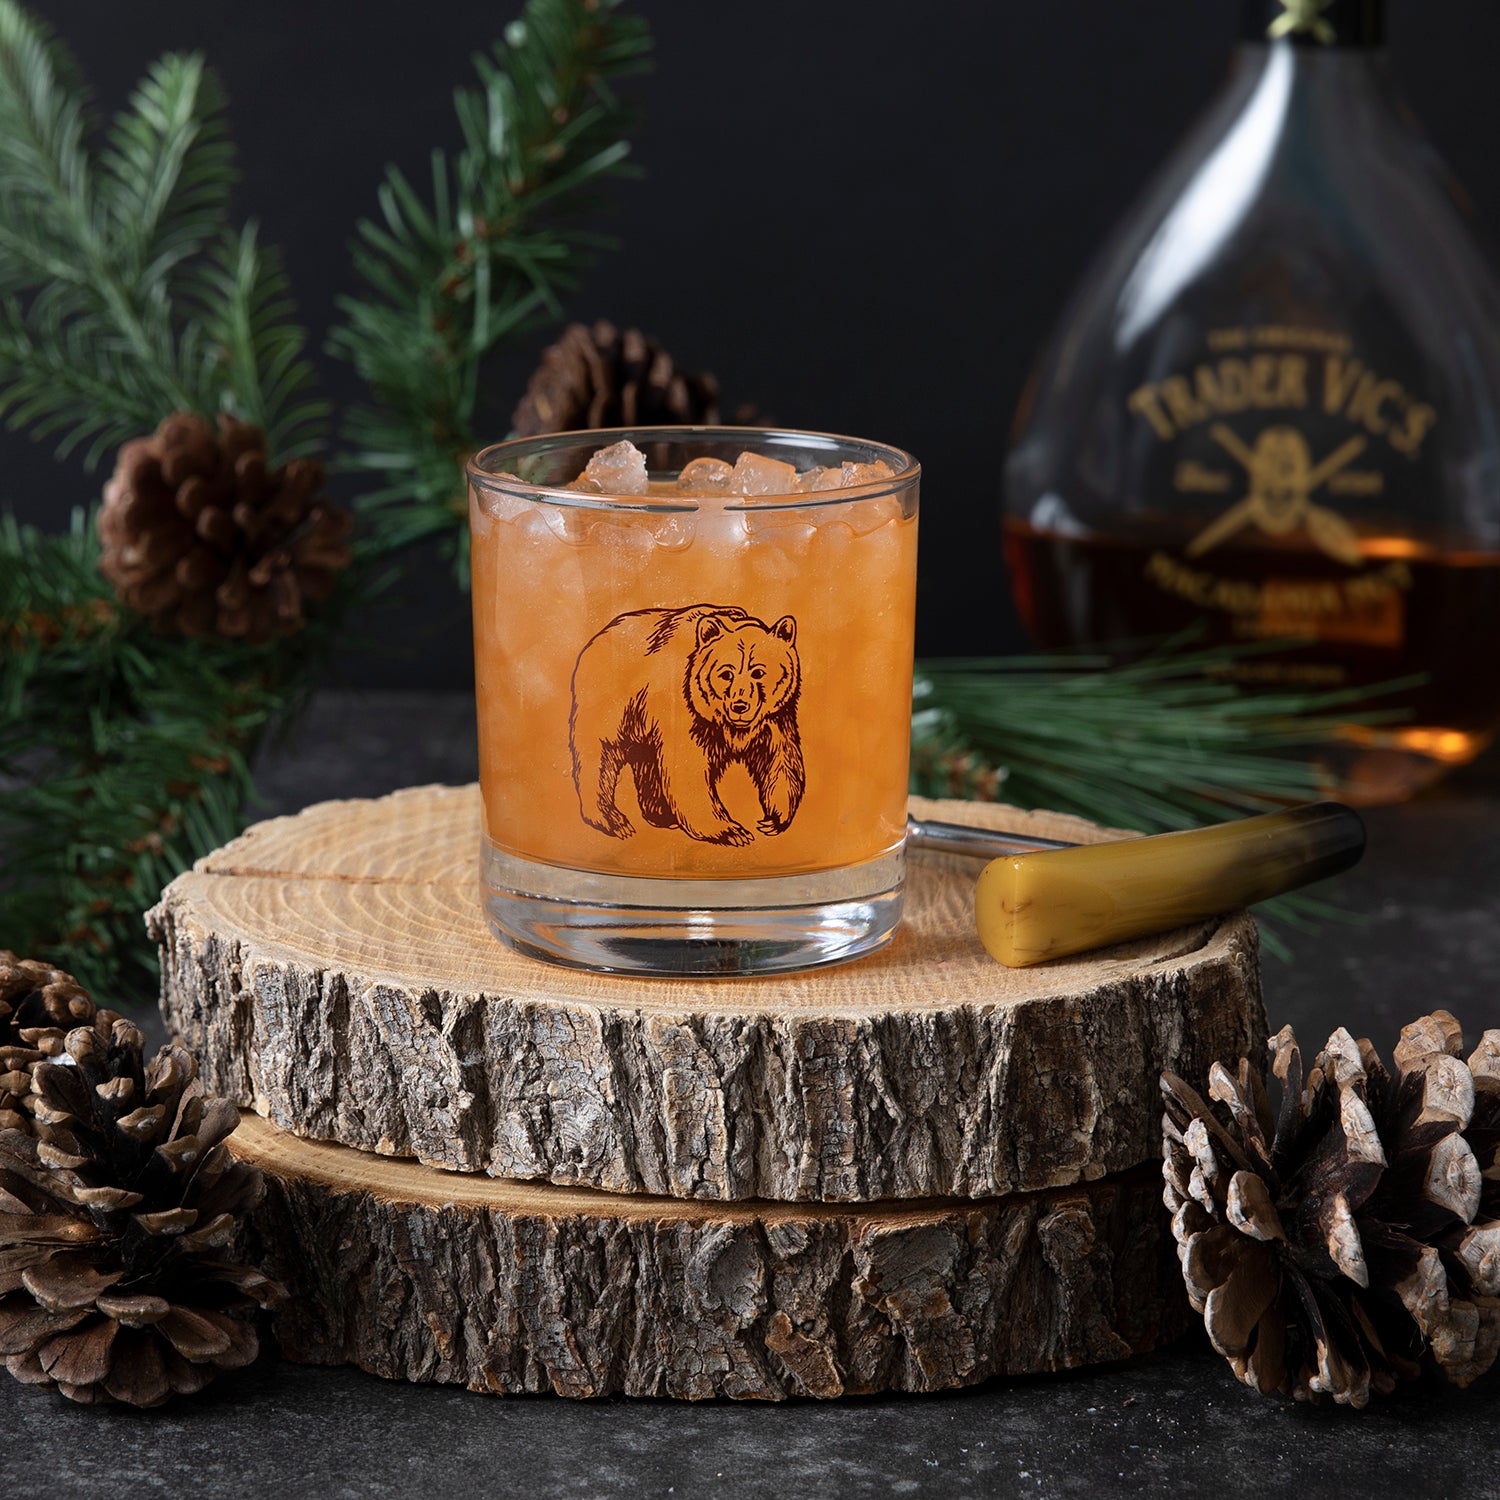 Hand-drawn bear illustration printed in brown on a whiskey glass, surrounded by pine boughs.